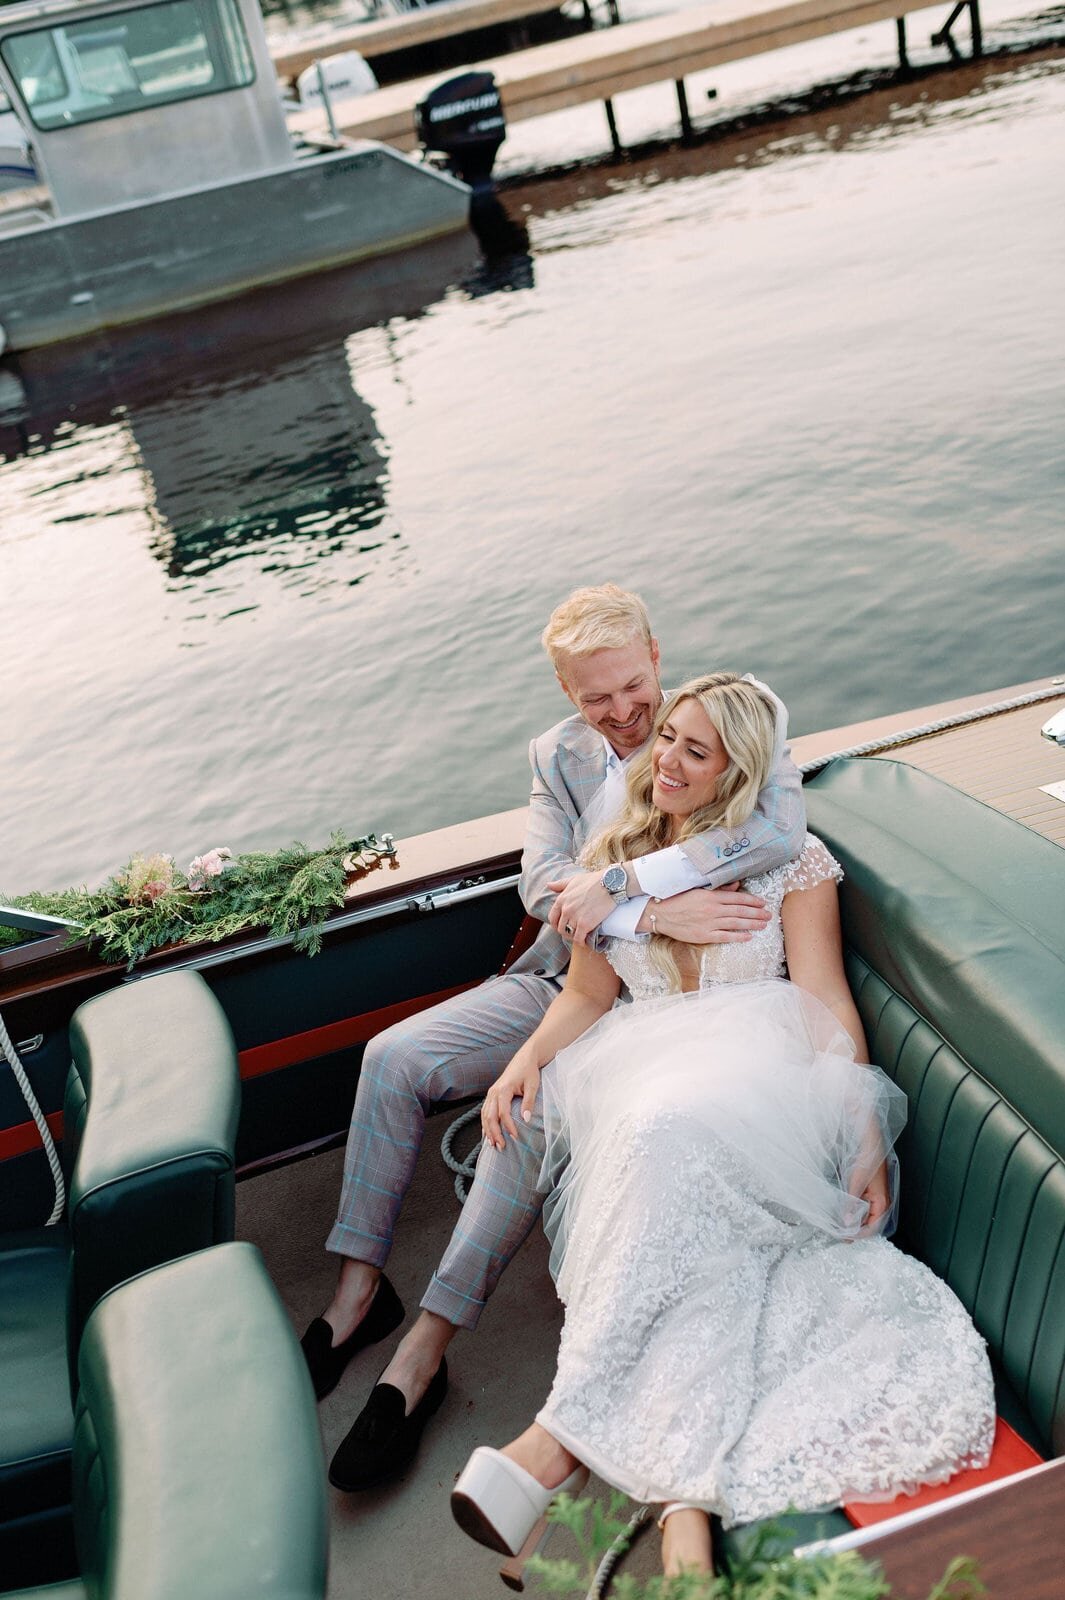 Bride and Groom Editorial Portrait on Luxury Wooden Boat Muskoka Lakes Golf and Country Resort Wedding Jacqueline James Photography